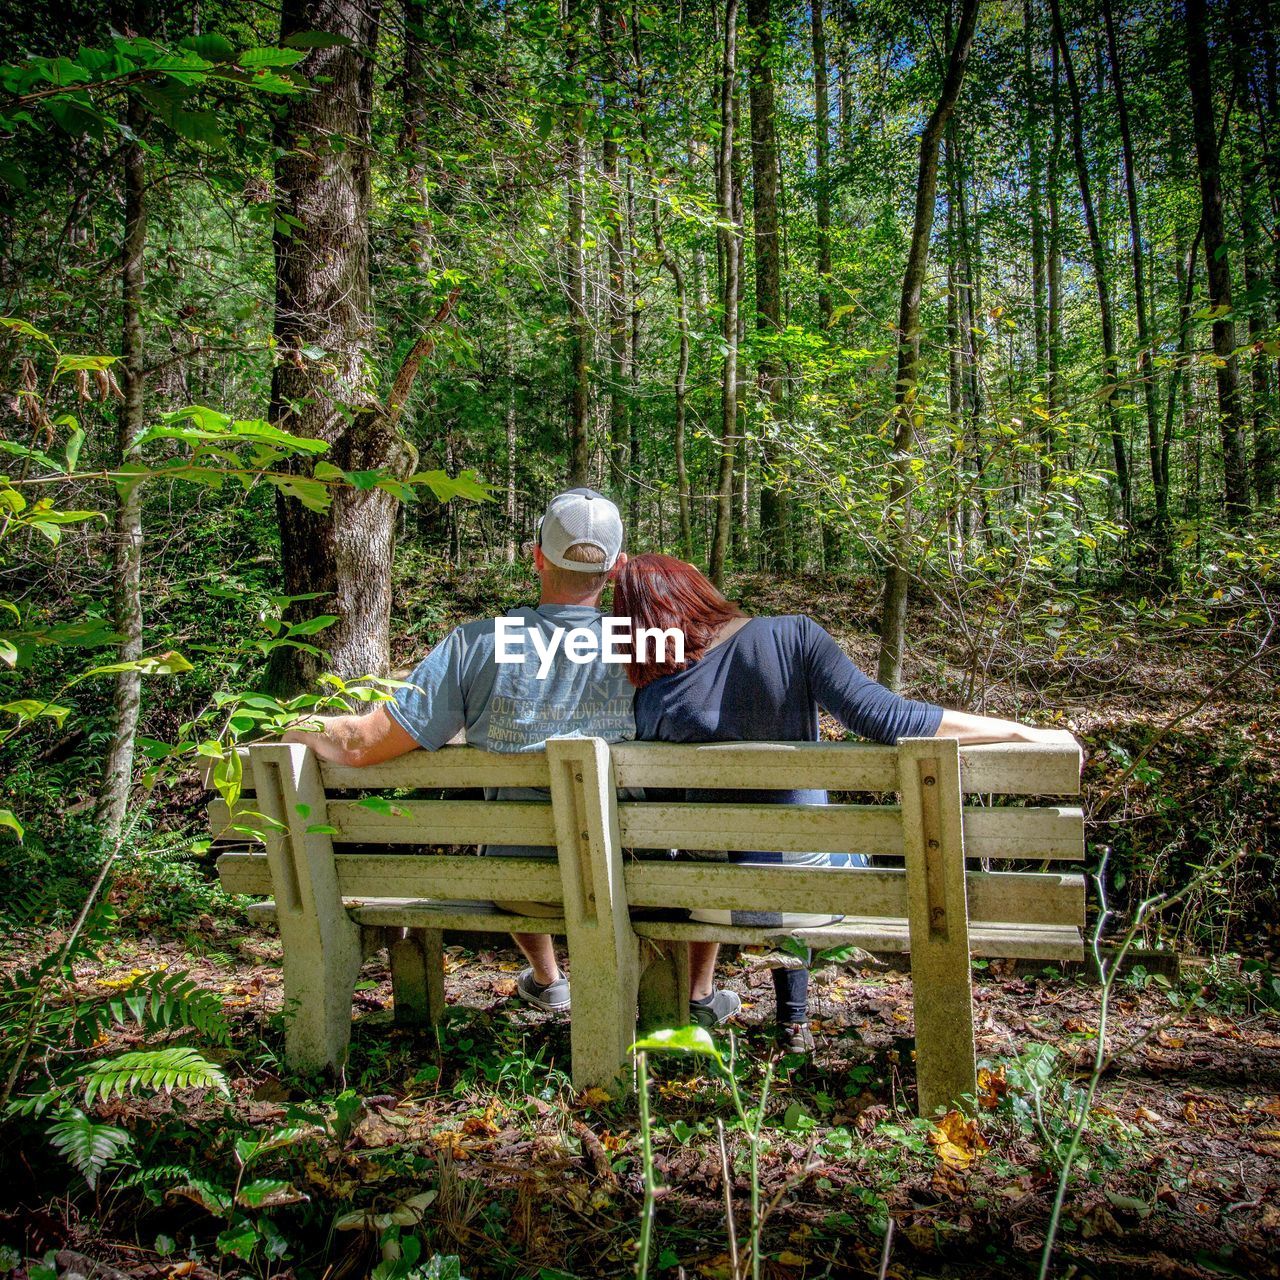 Couple siting on bench in forest